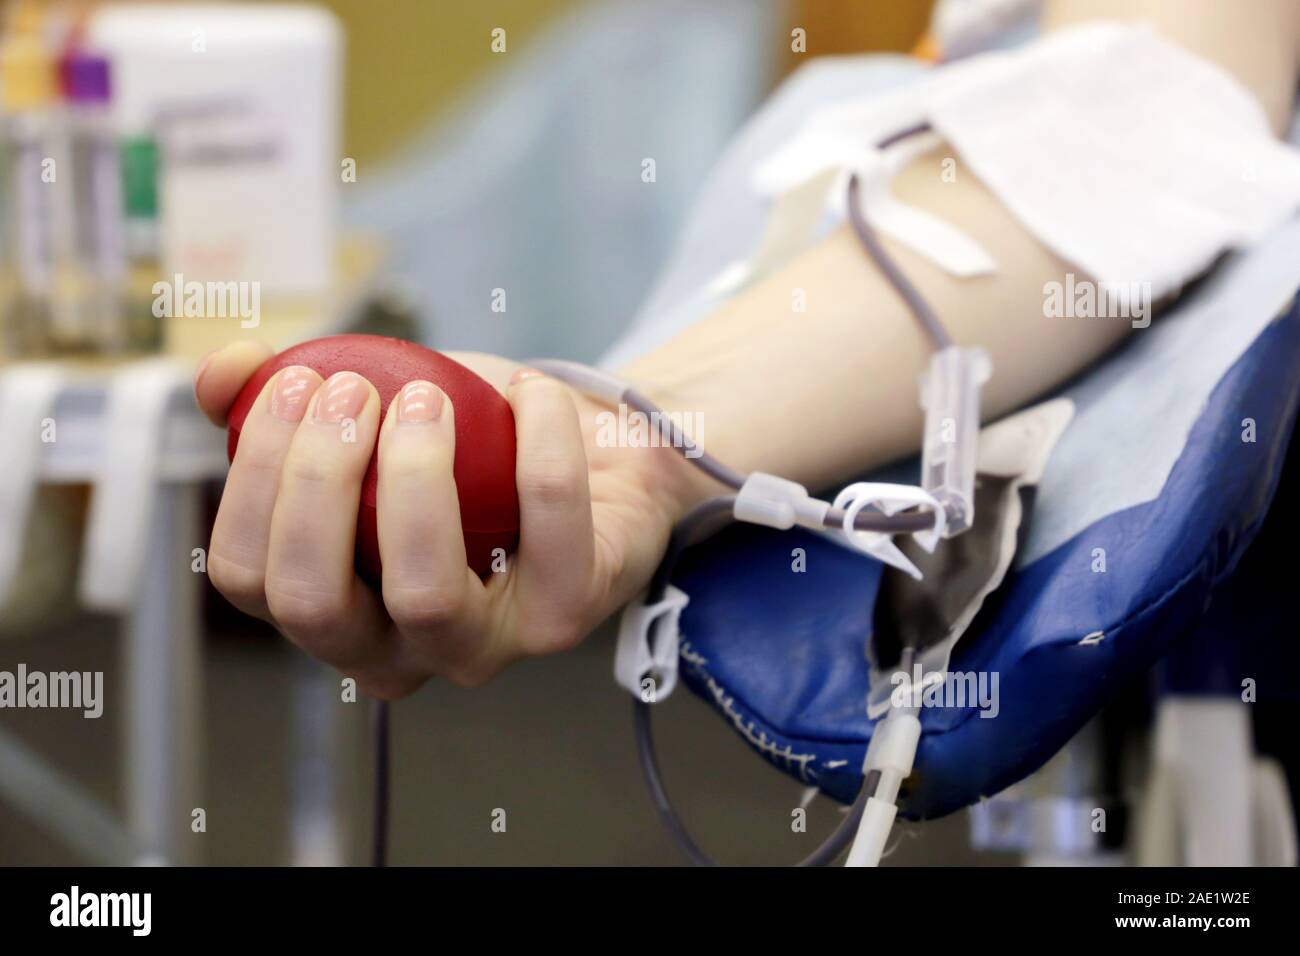 Blood donor during donation with a red bouncy ball in hand. Concept of donorship, transfusion, health care Stock Photo